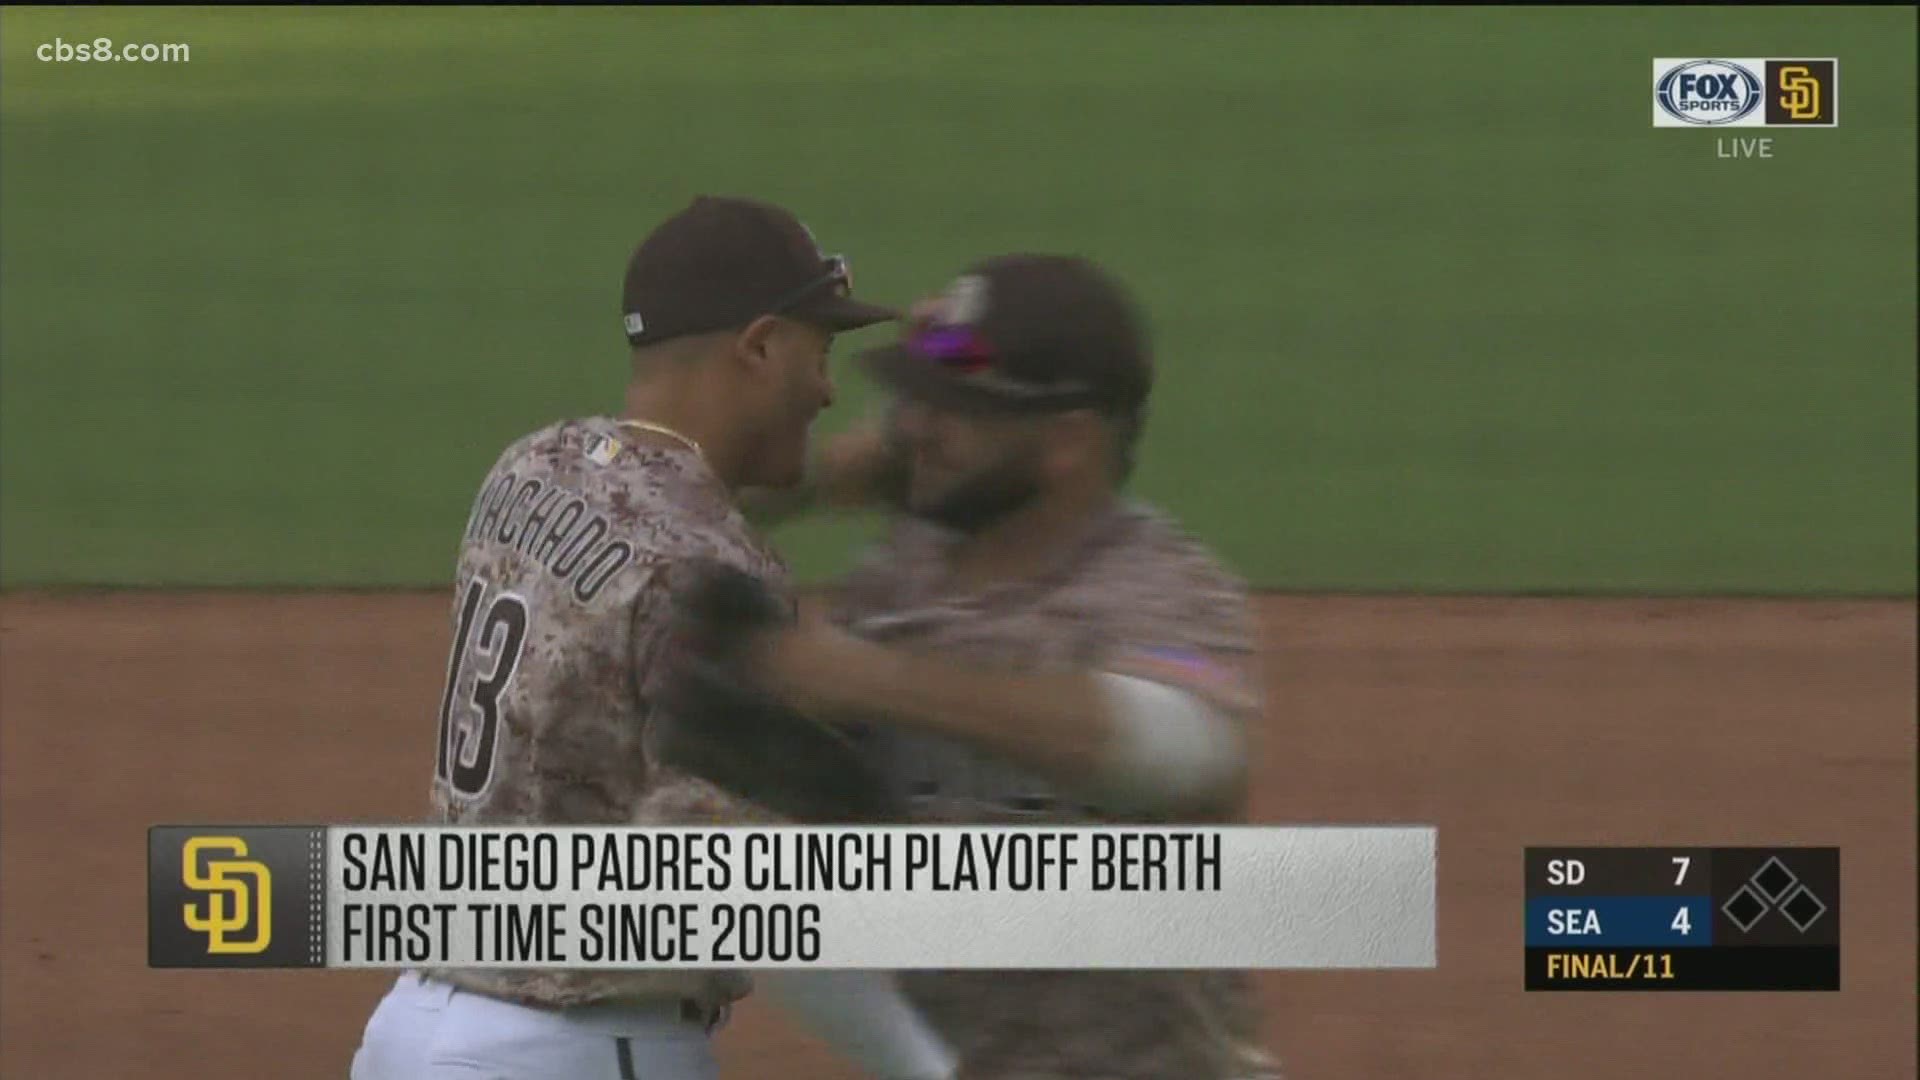 With a 7-4 victory over the Seattle Mariners on Sunday, the San Diego Padres have clinched a playoff spot for the first time in 14 seasons.